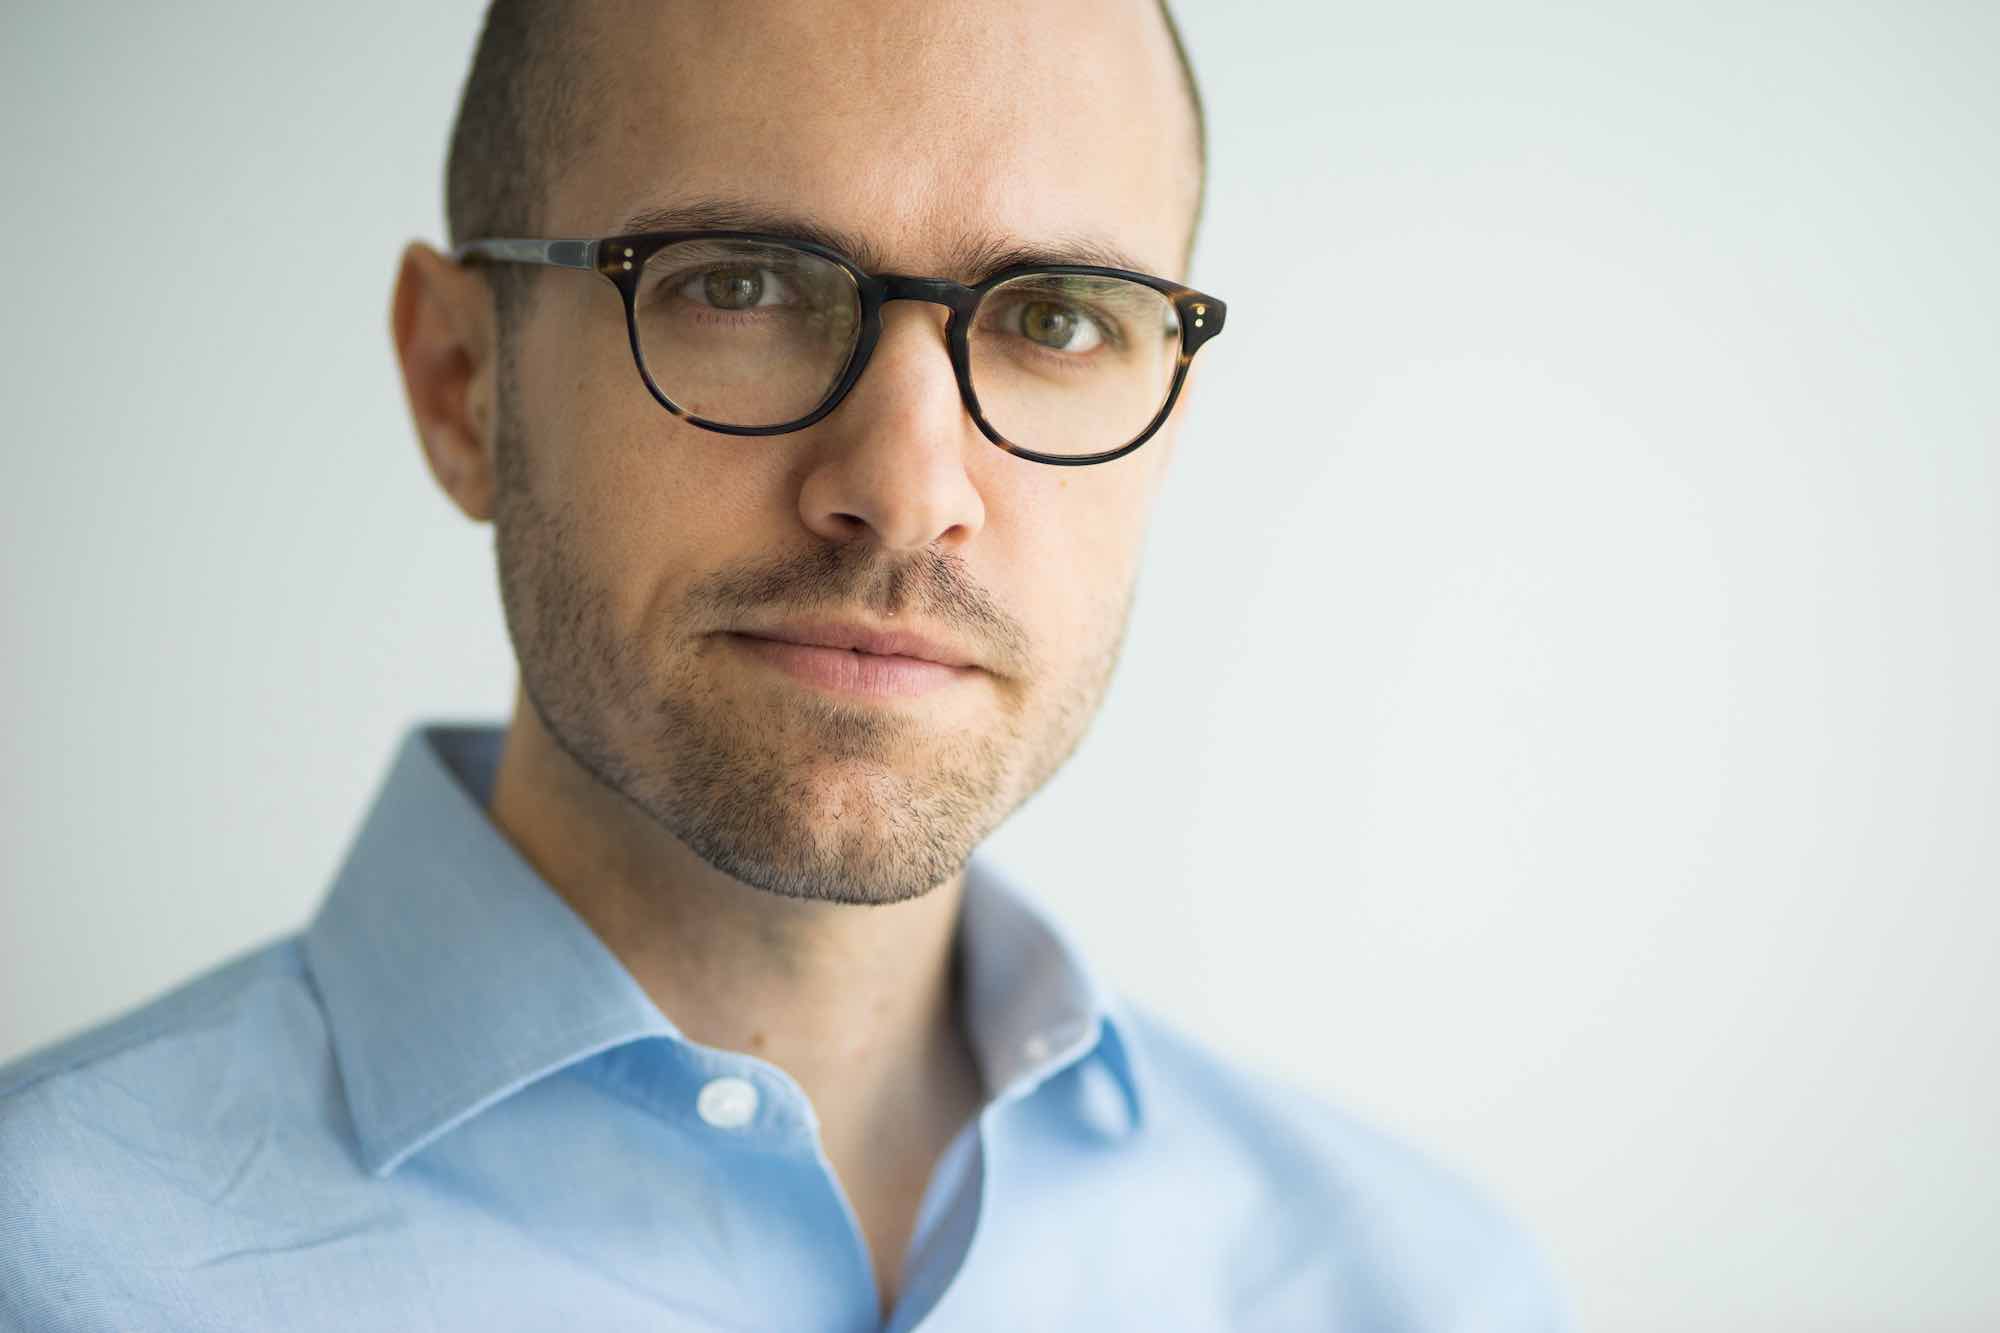 Sulzberger at the New York Times headquarters. | Credit: New York Times